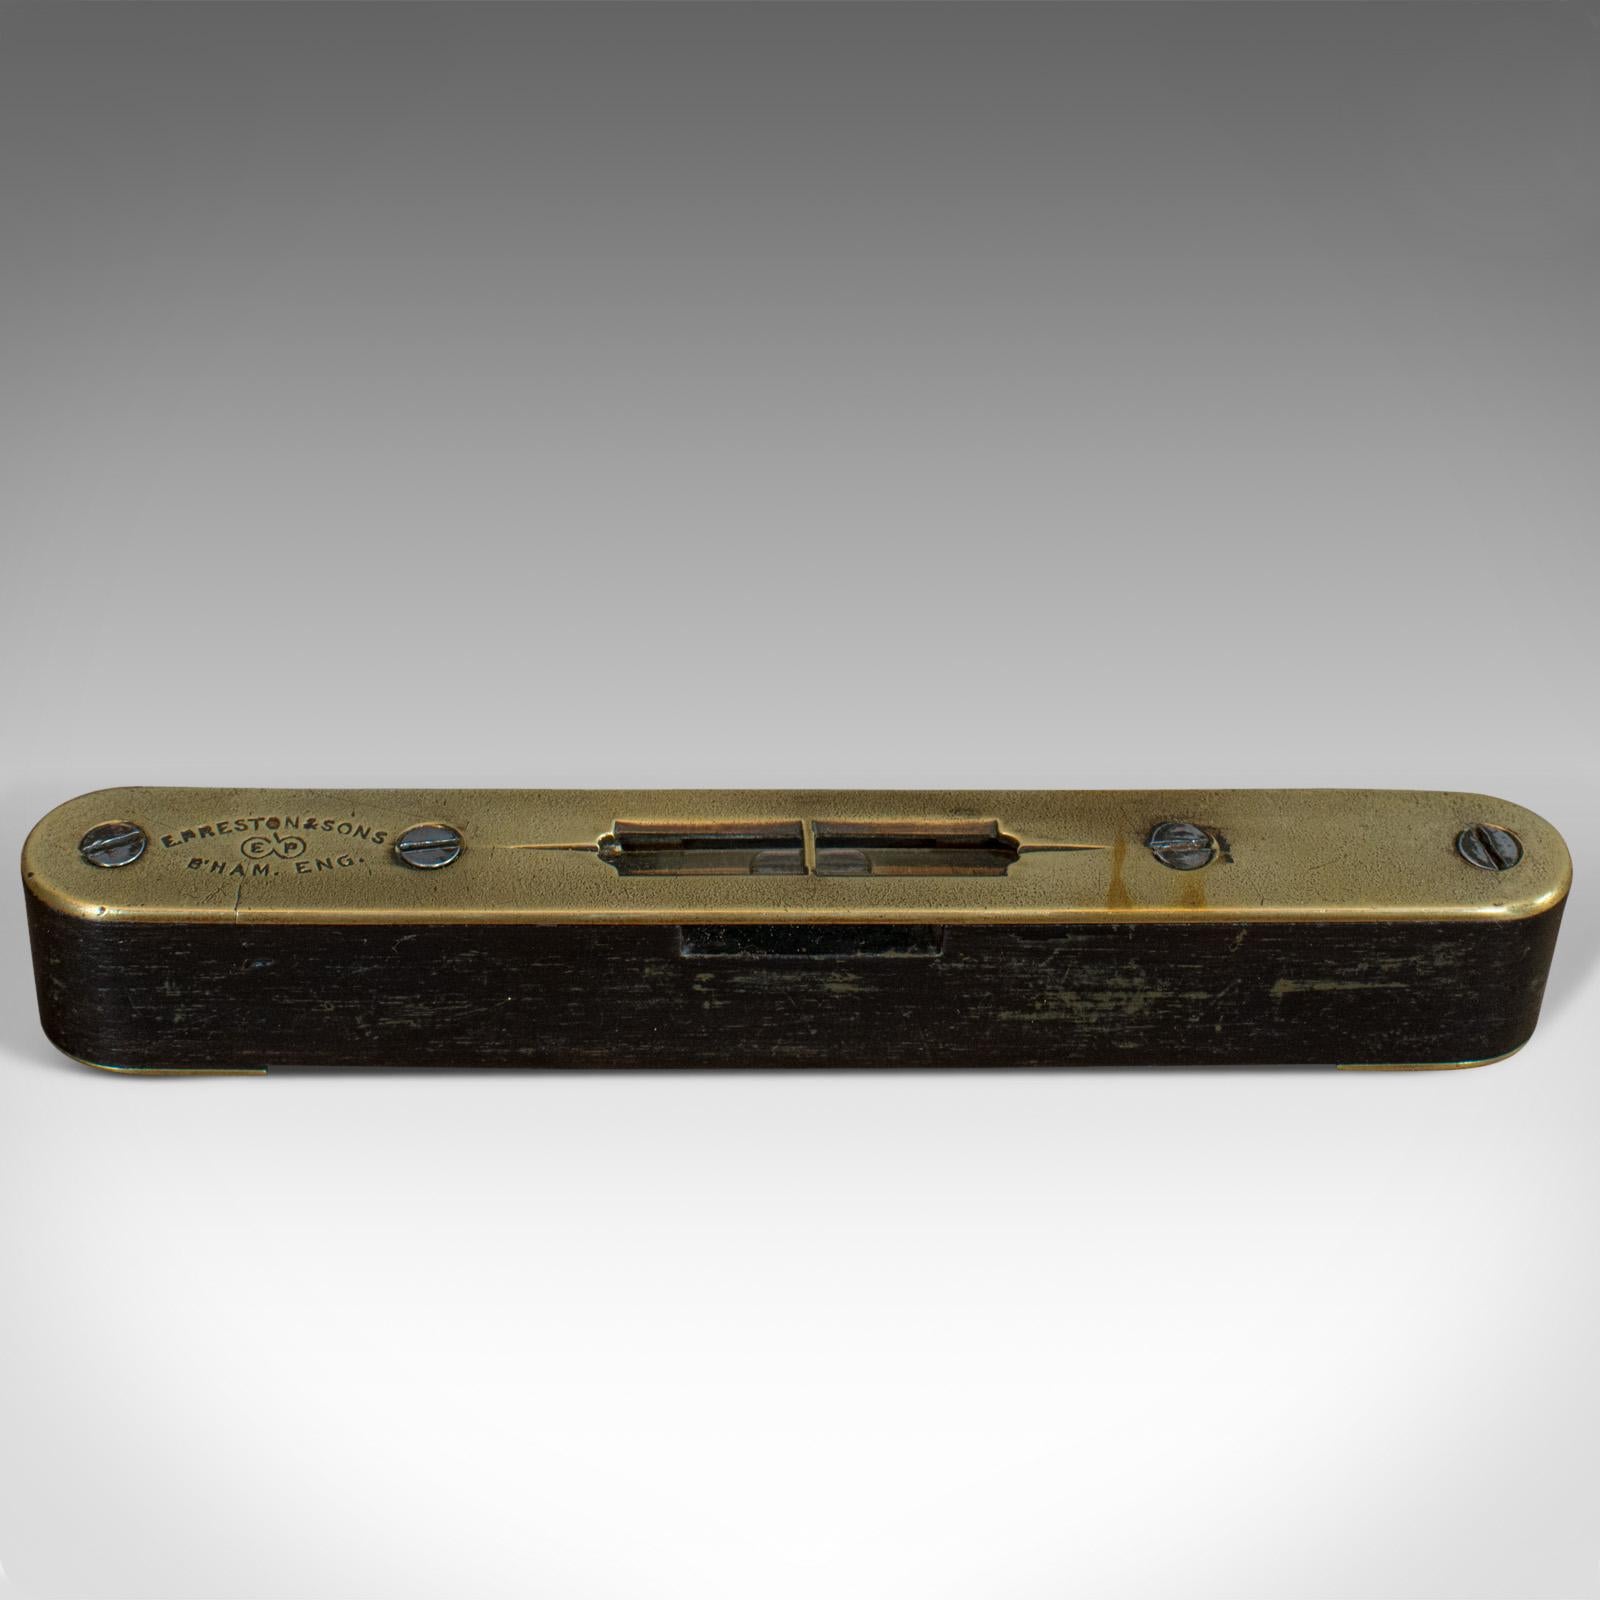 This is a small vintage spirit level. An English, rosewood and brass instrument by E. Preston and Sons, dating to the early 20th century, circa 1930.

Pleasingly diminutive spirit level
Displays a desirable aged patina
Brass top plate and end